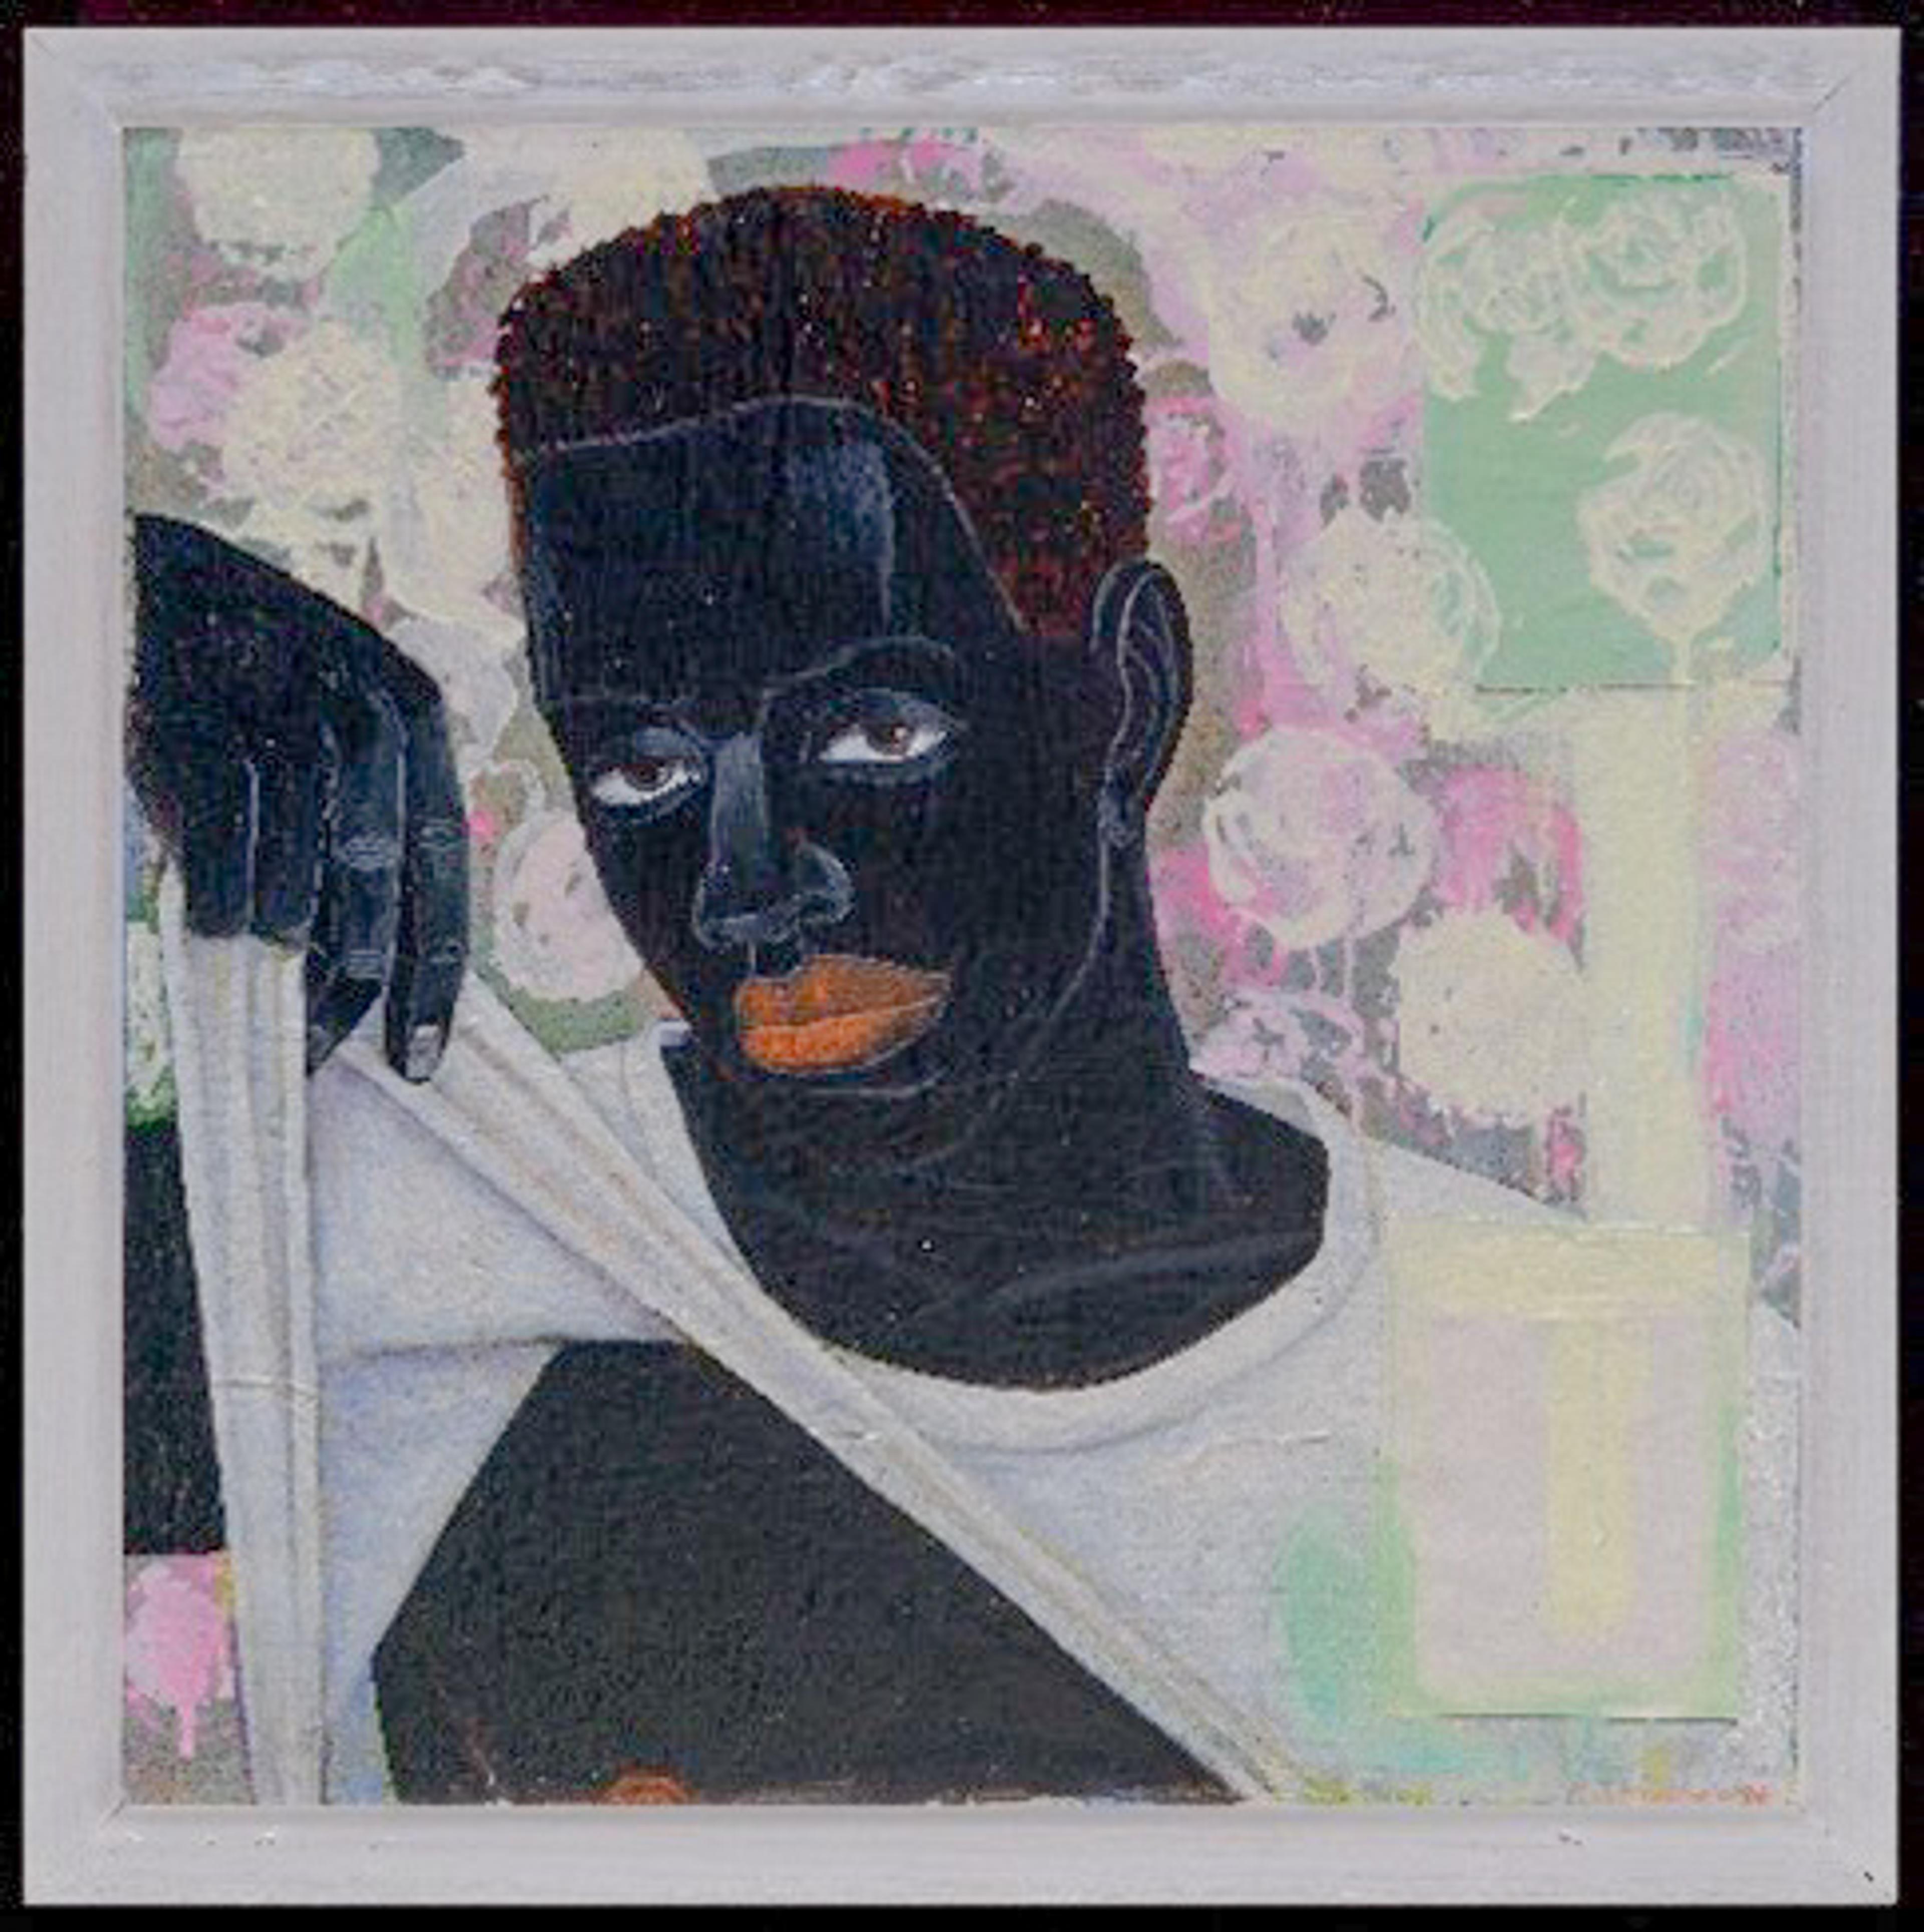 Kerry James Marshall (b. 1955), Supermodel, 1994, Acrylic and collage on canvas, Museum of Fine Arts, Boston; The John Axelrod Collection—Frank B. Bemis Fund, Charles H. Bayley Fund, and the Heritage Fund for a Diverse Collection, 2011.1825, Image courtesy of the artist and Jack Shainman Gallery, New York